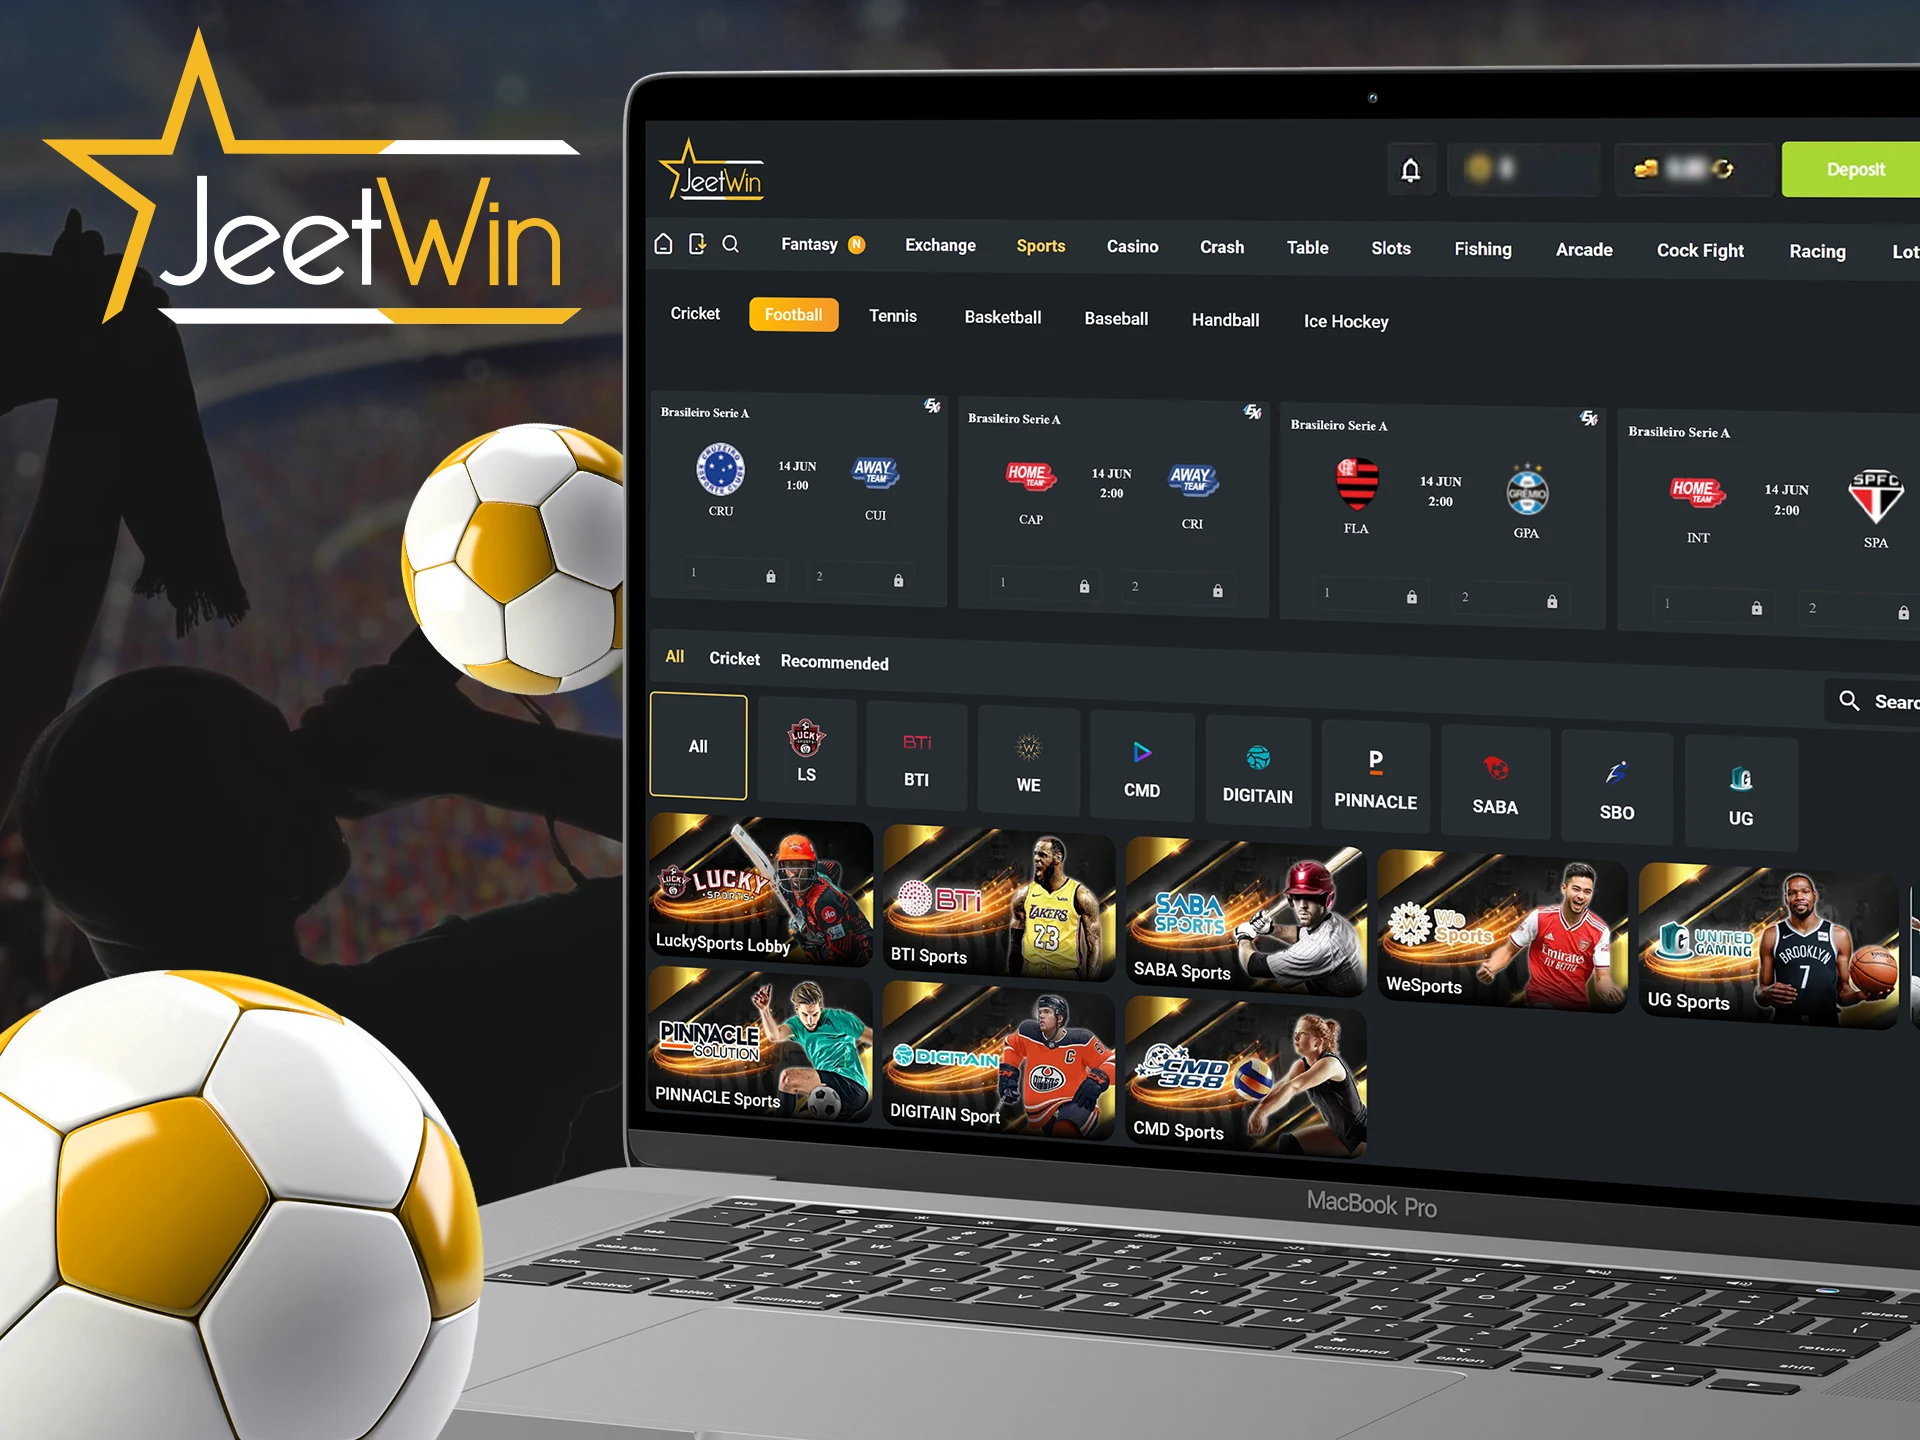 Bet on your favorite team with Jeetwin and win.